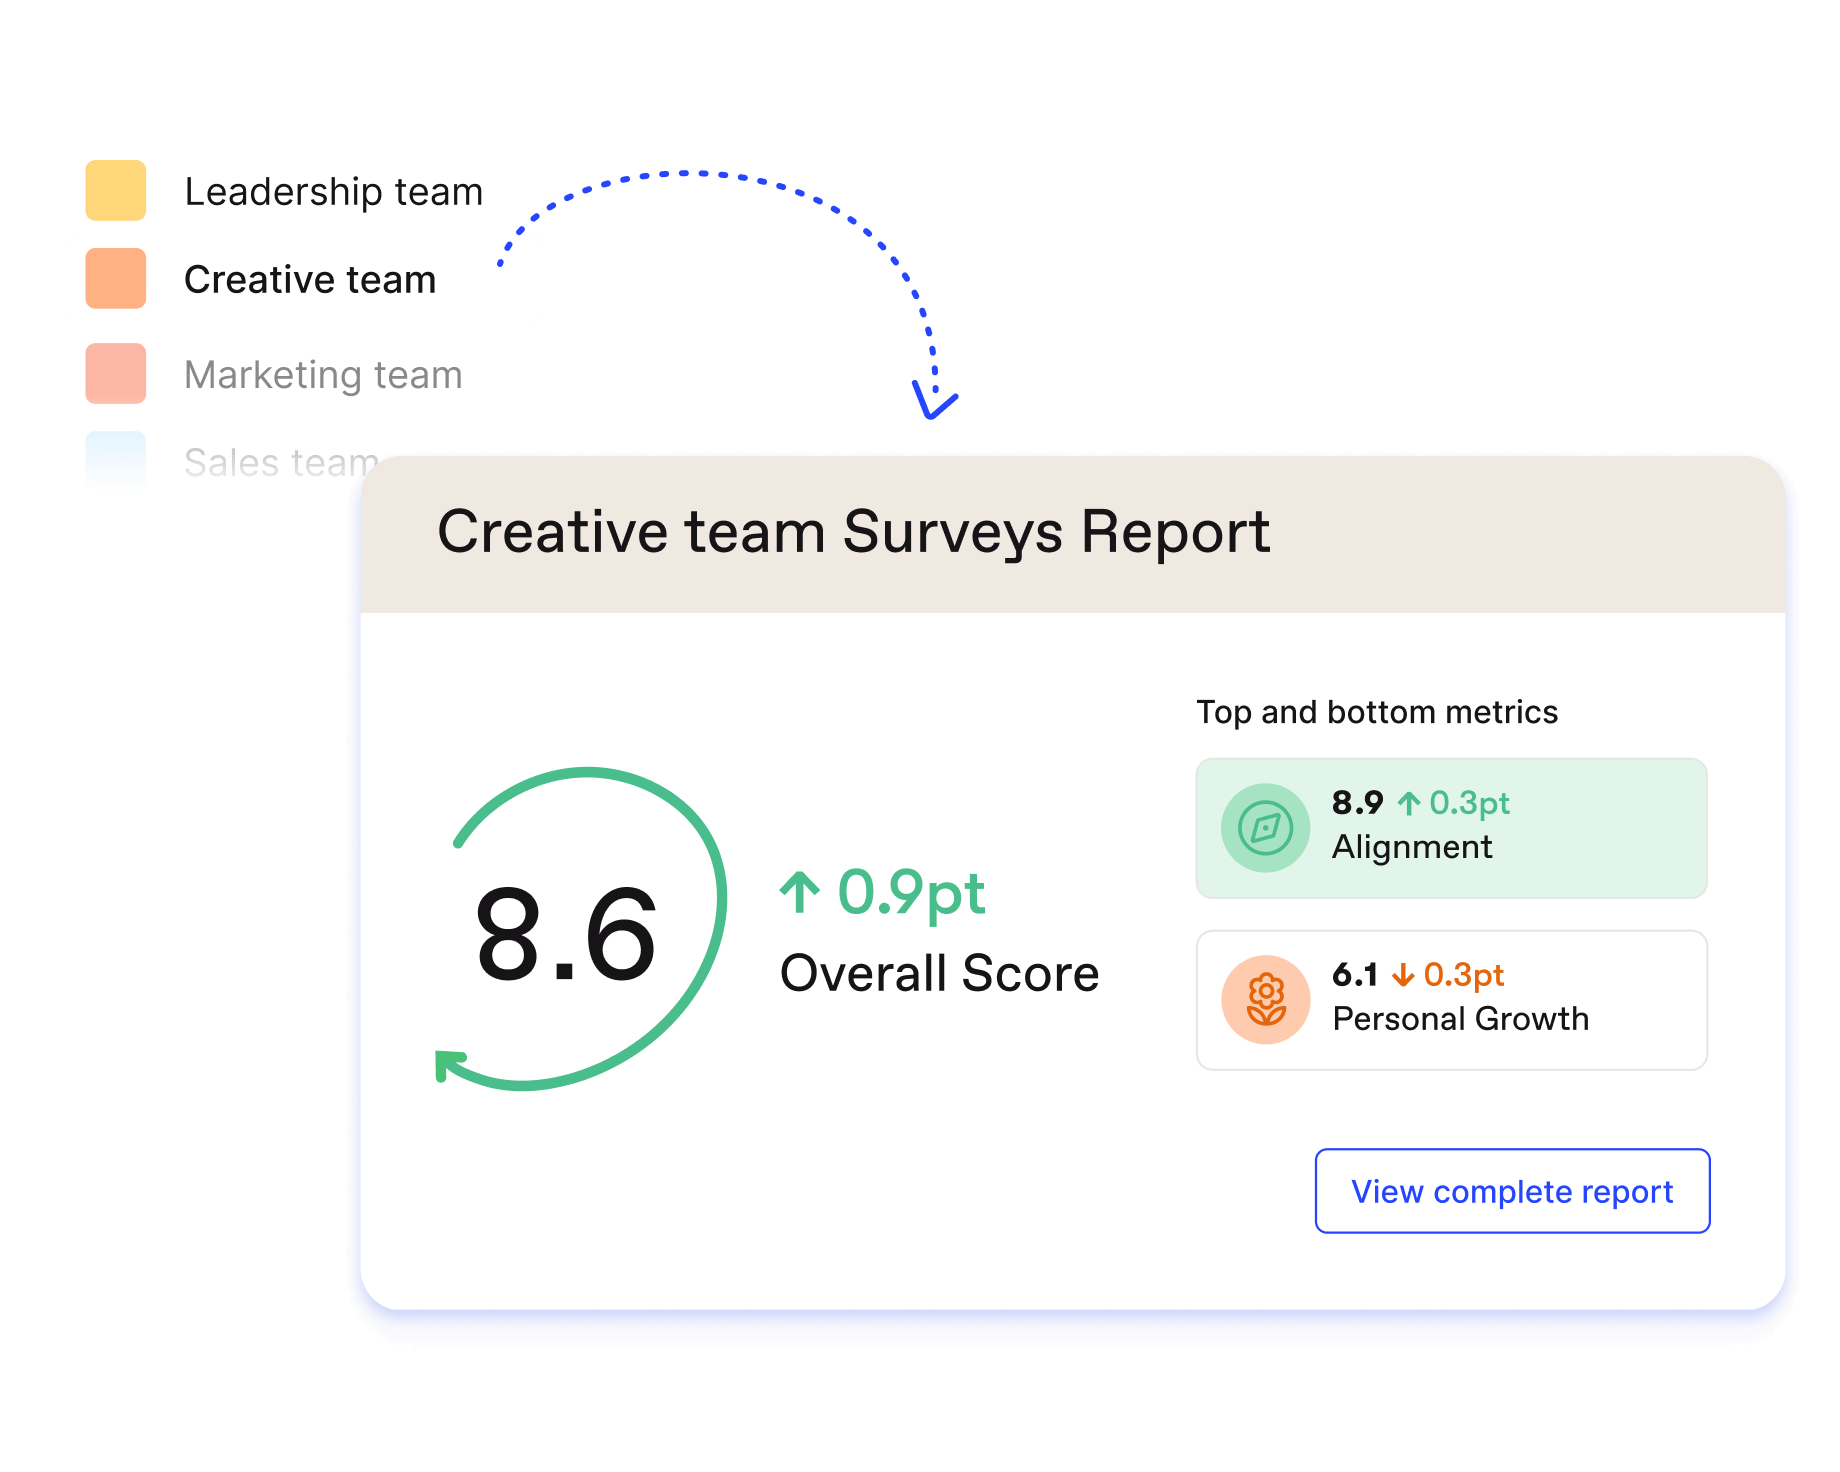 Overview of the Creative Team Engagement Report which scored an 8.6 out of 10.